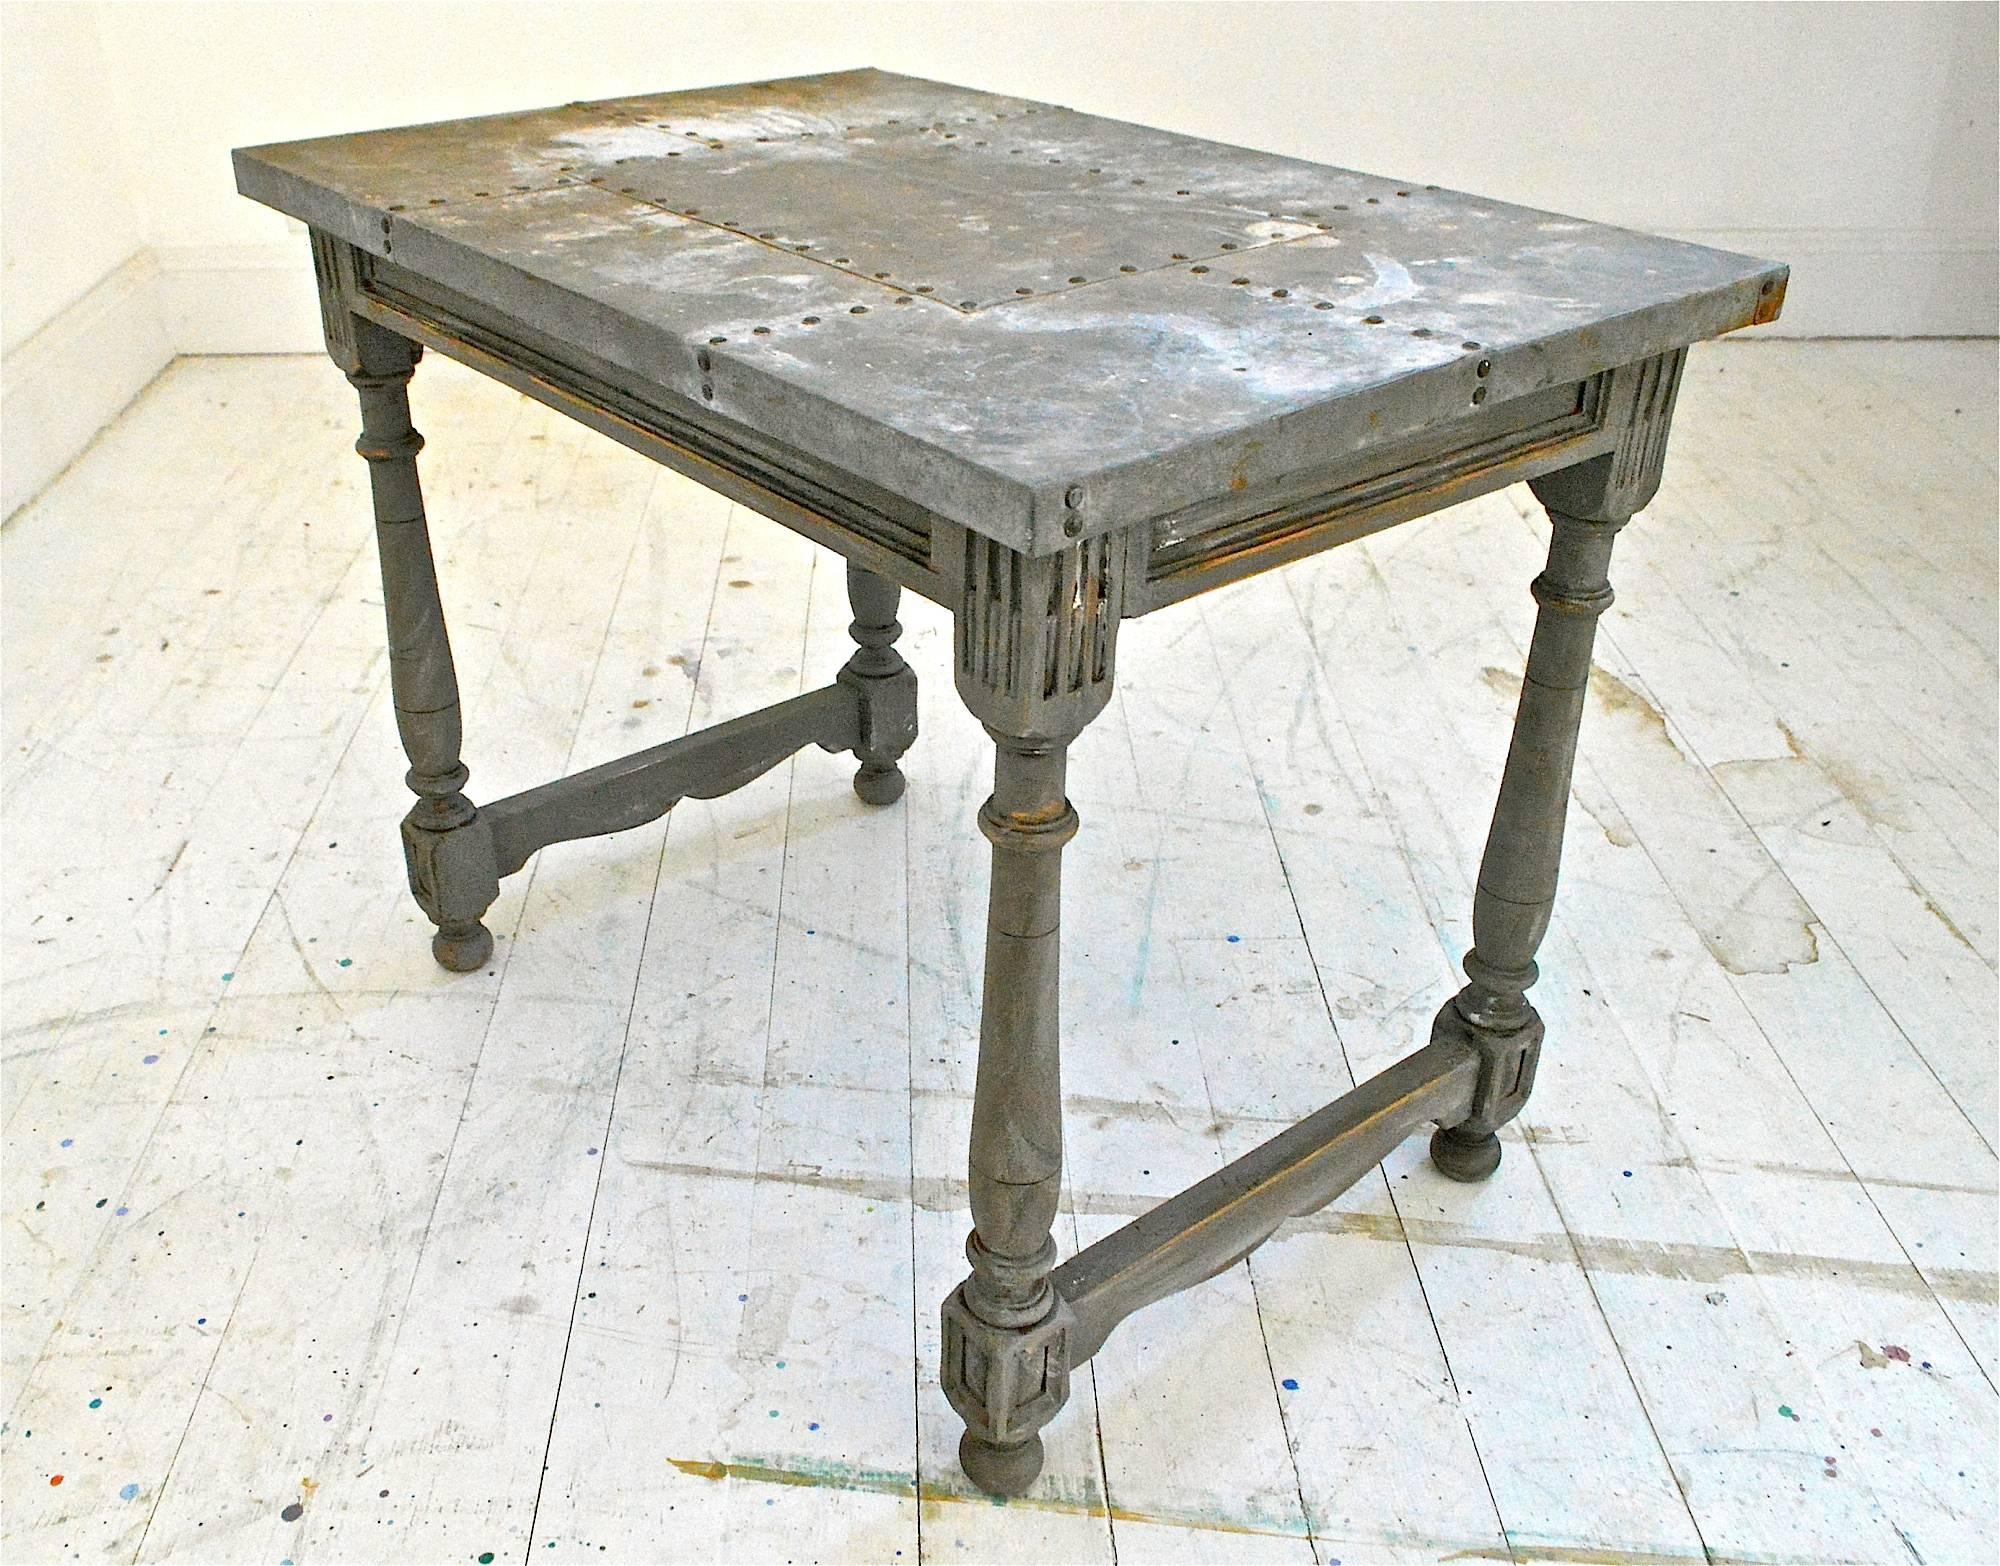 A handsome and useful zinc topped art studio stand / pedestal. Move it around your studio to house brushes and brush pots, paints and thinners as the galvanized top will last and last and become more worn and pretty with age and use.